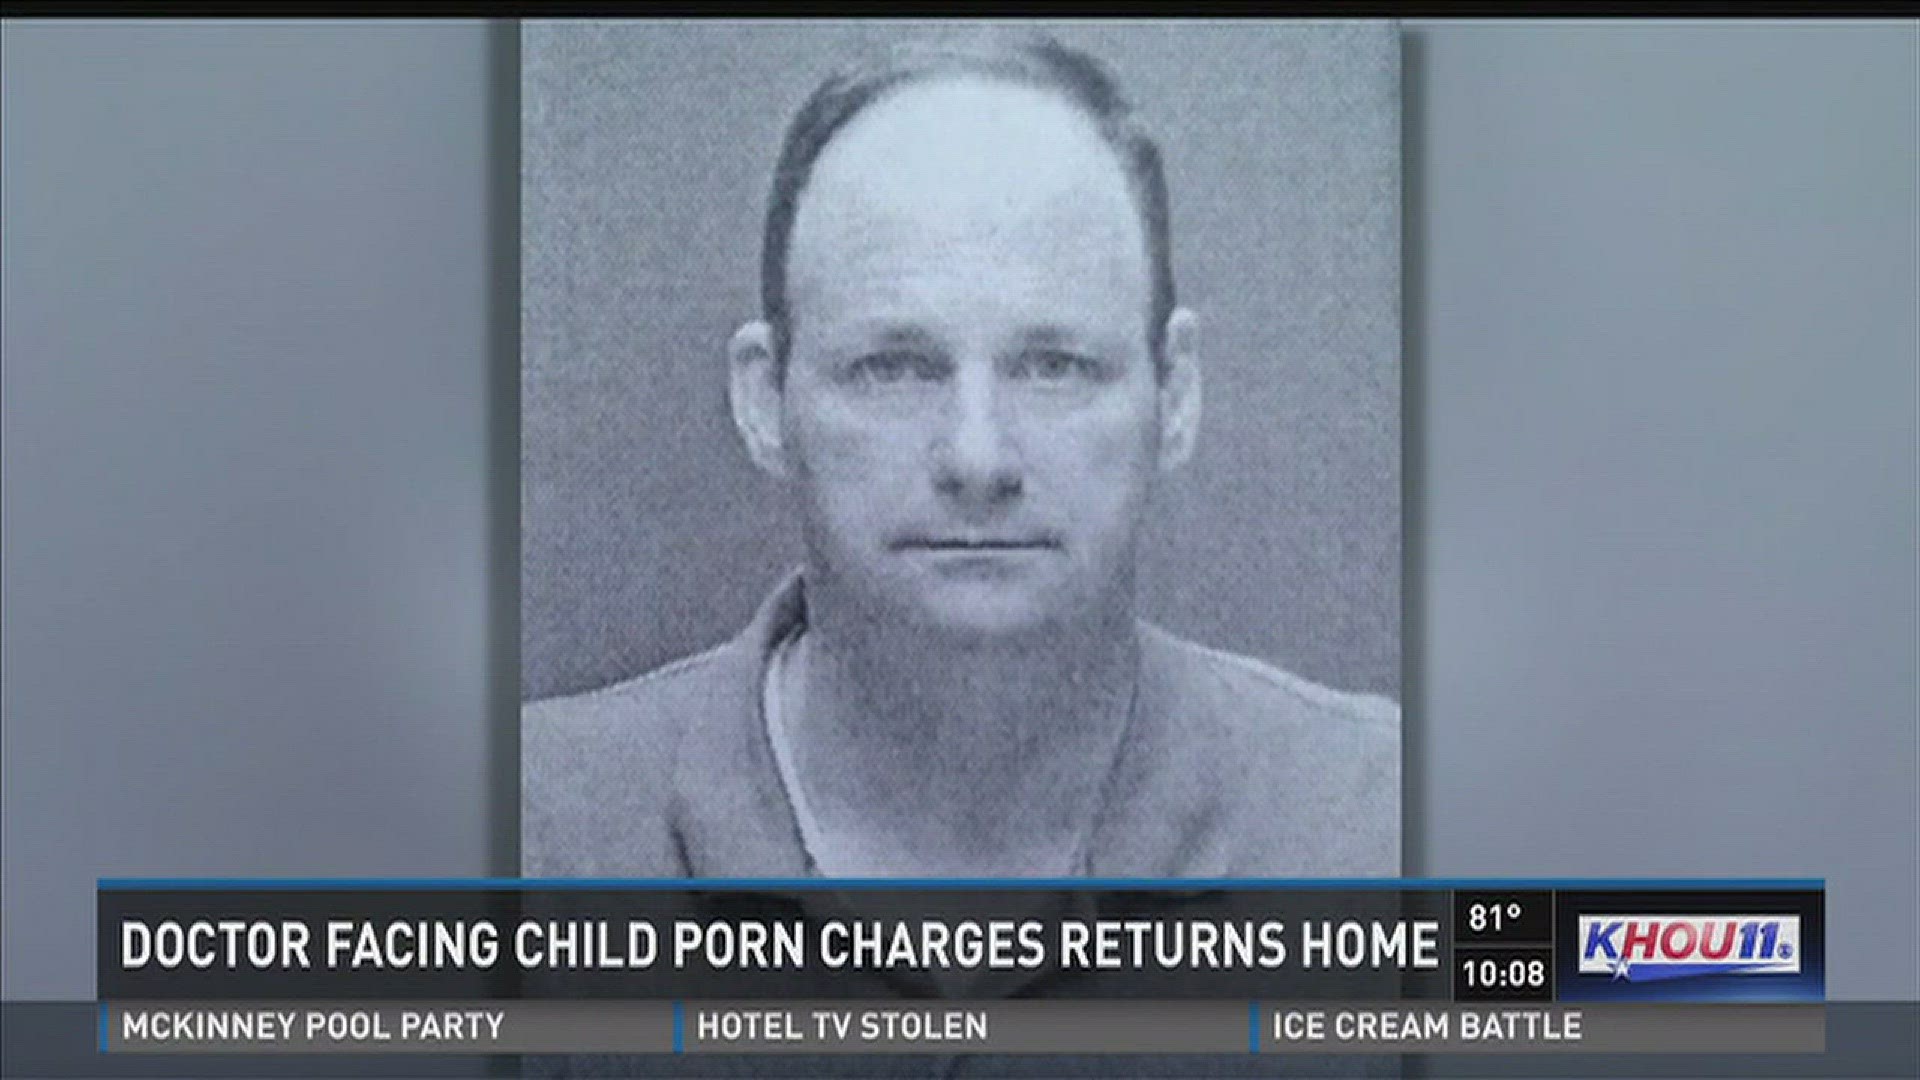 Dr. Dennis Hughes returned to his home after he was arrested on child pornography charges last week.